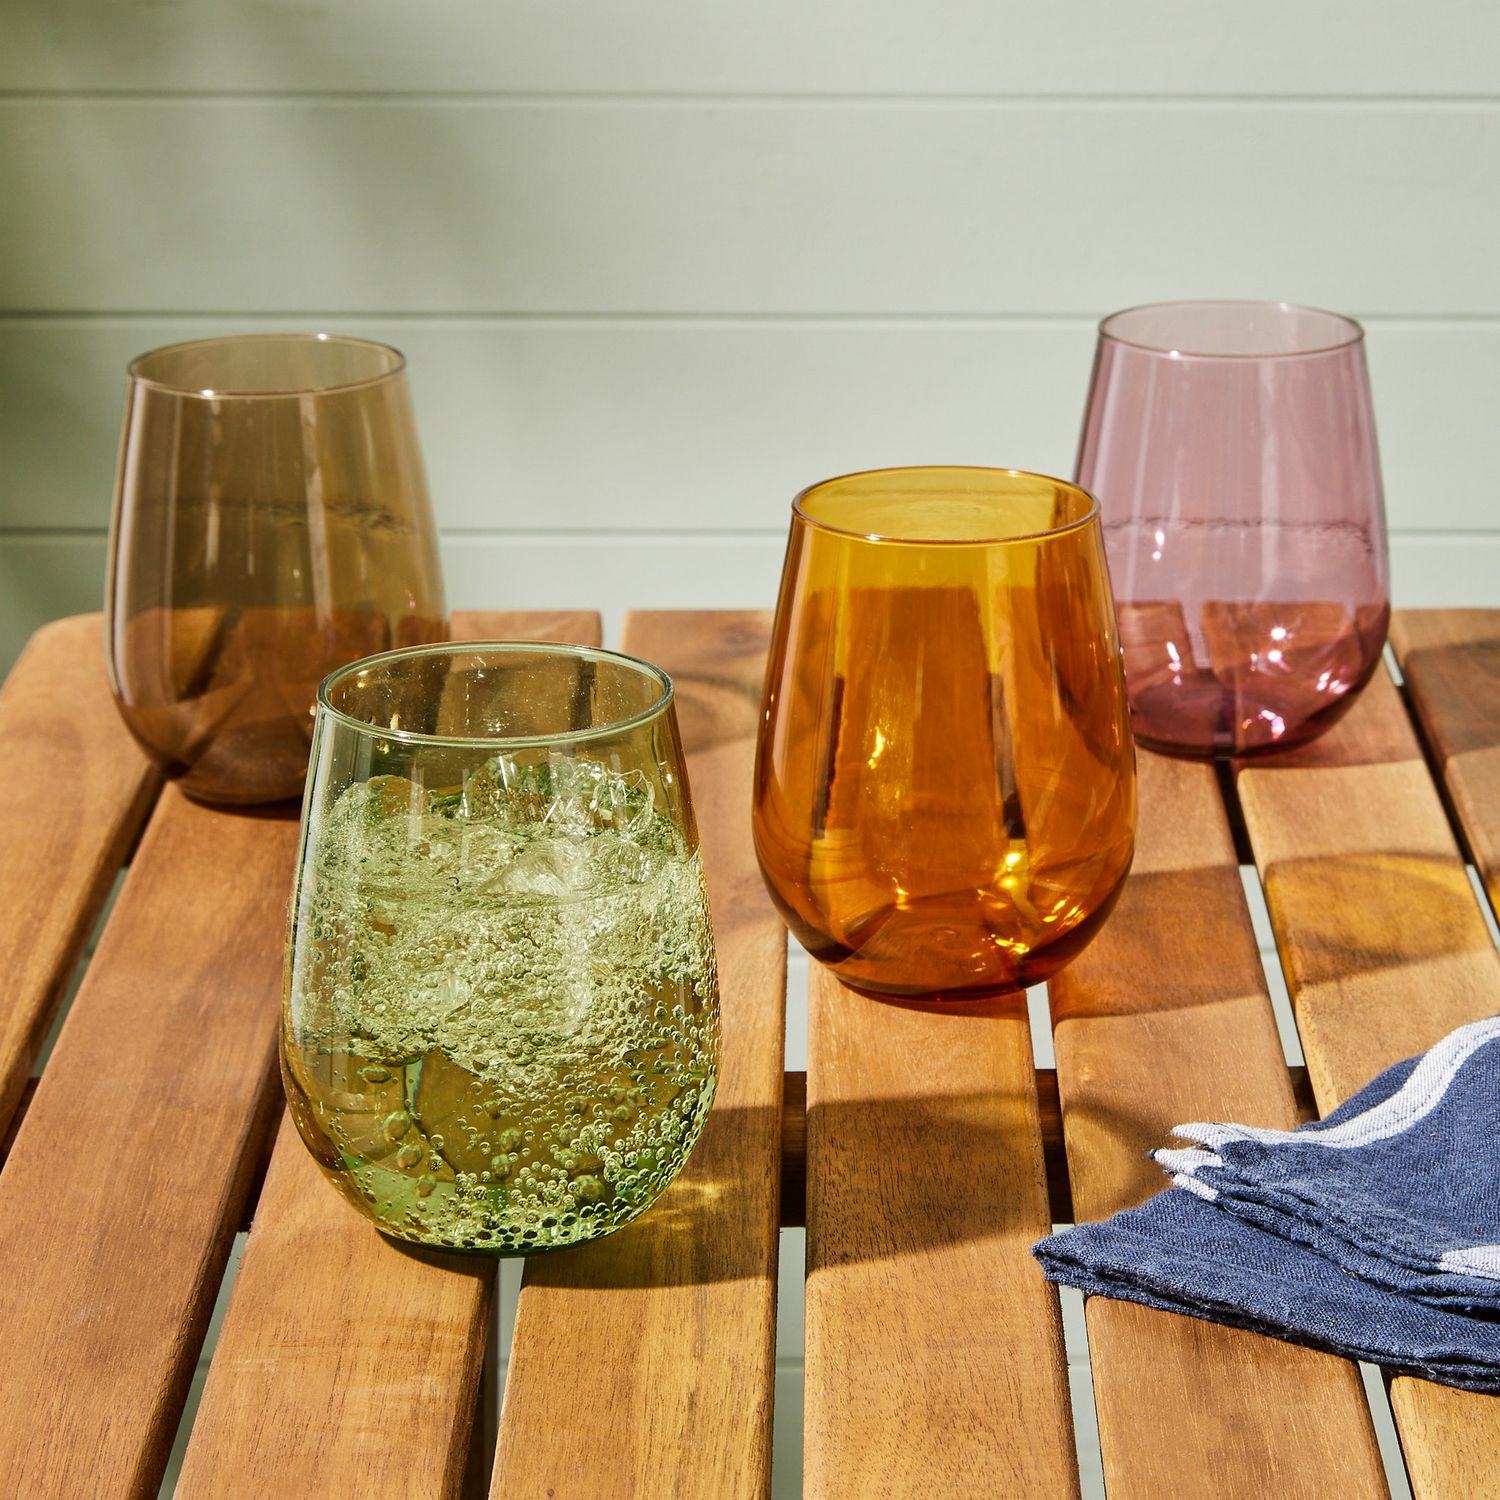 8 Best Stemless Wine Glasses Of 2023 - Our Favorite Stemless Wine Glasses